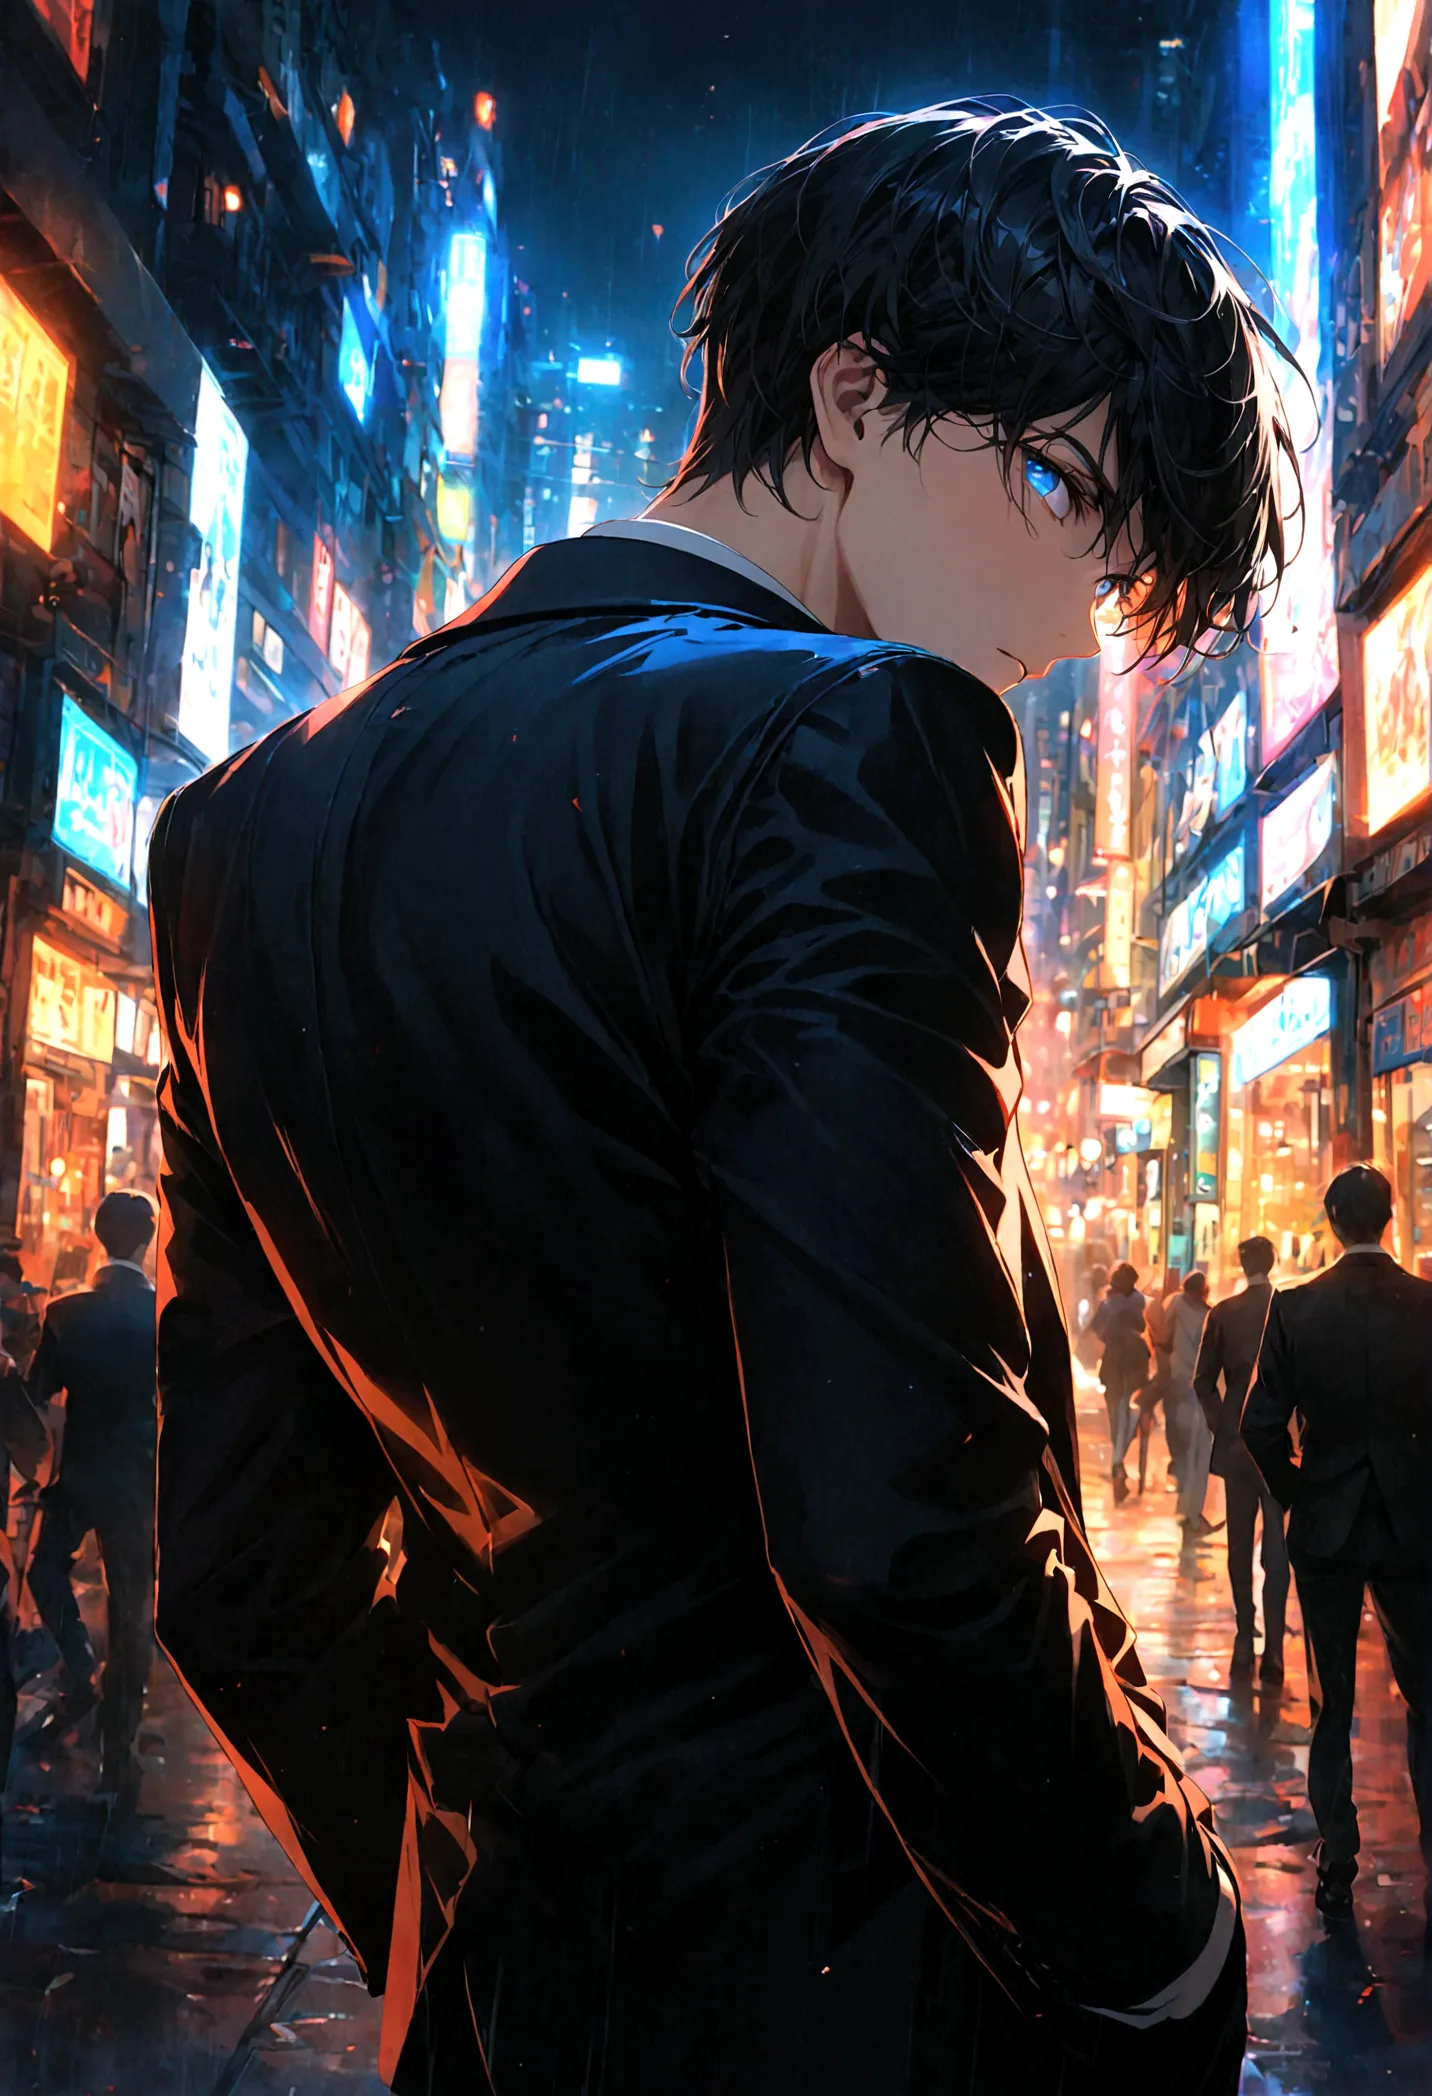 A young man with black hair and blue eyes, all in a black suit, turned his back and half his face in the middle of the city at night.